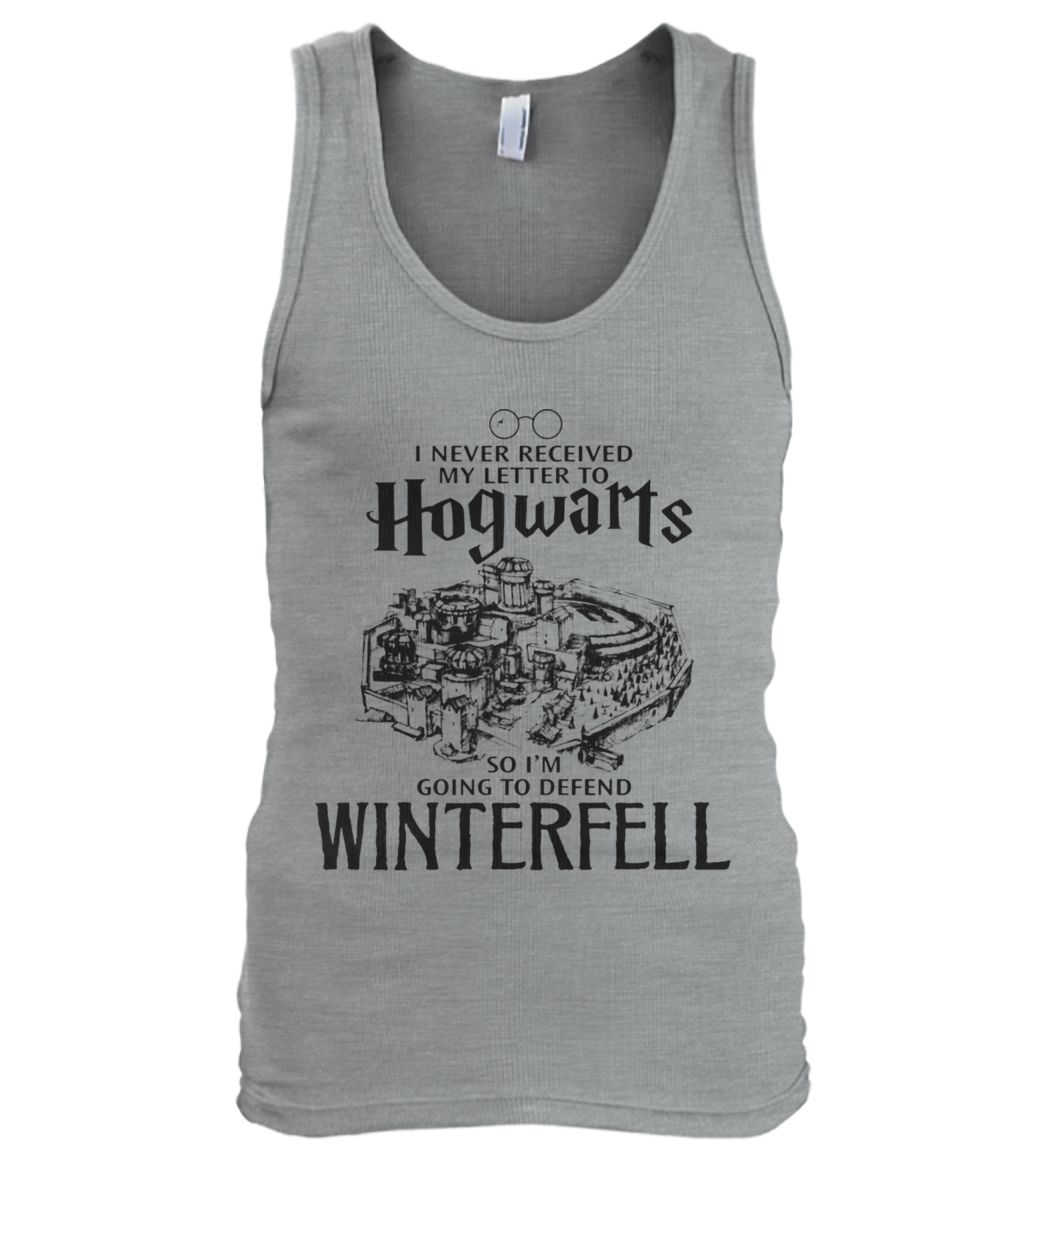 I never received my letter to hogwarts so I'm going to defend winterfell men's tank top